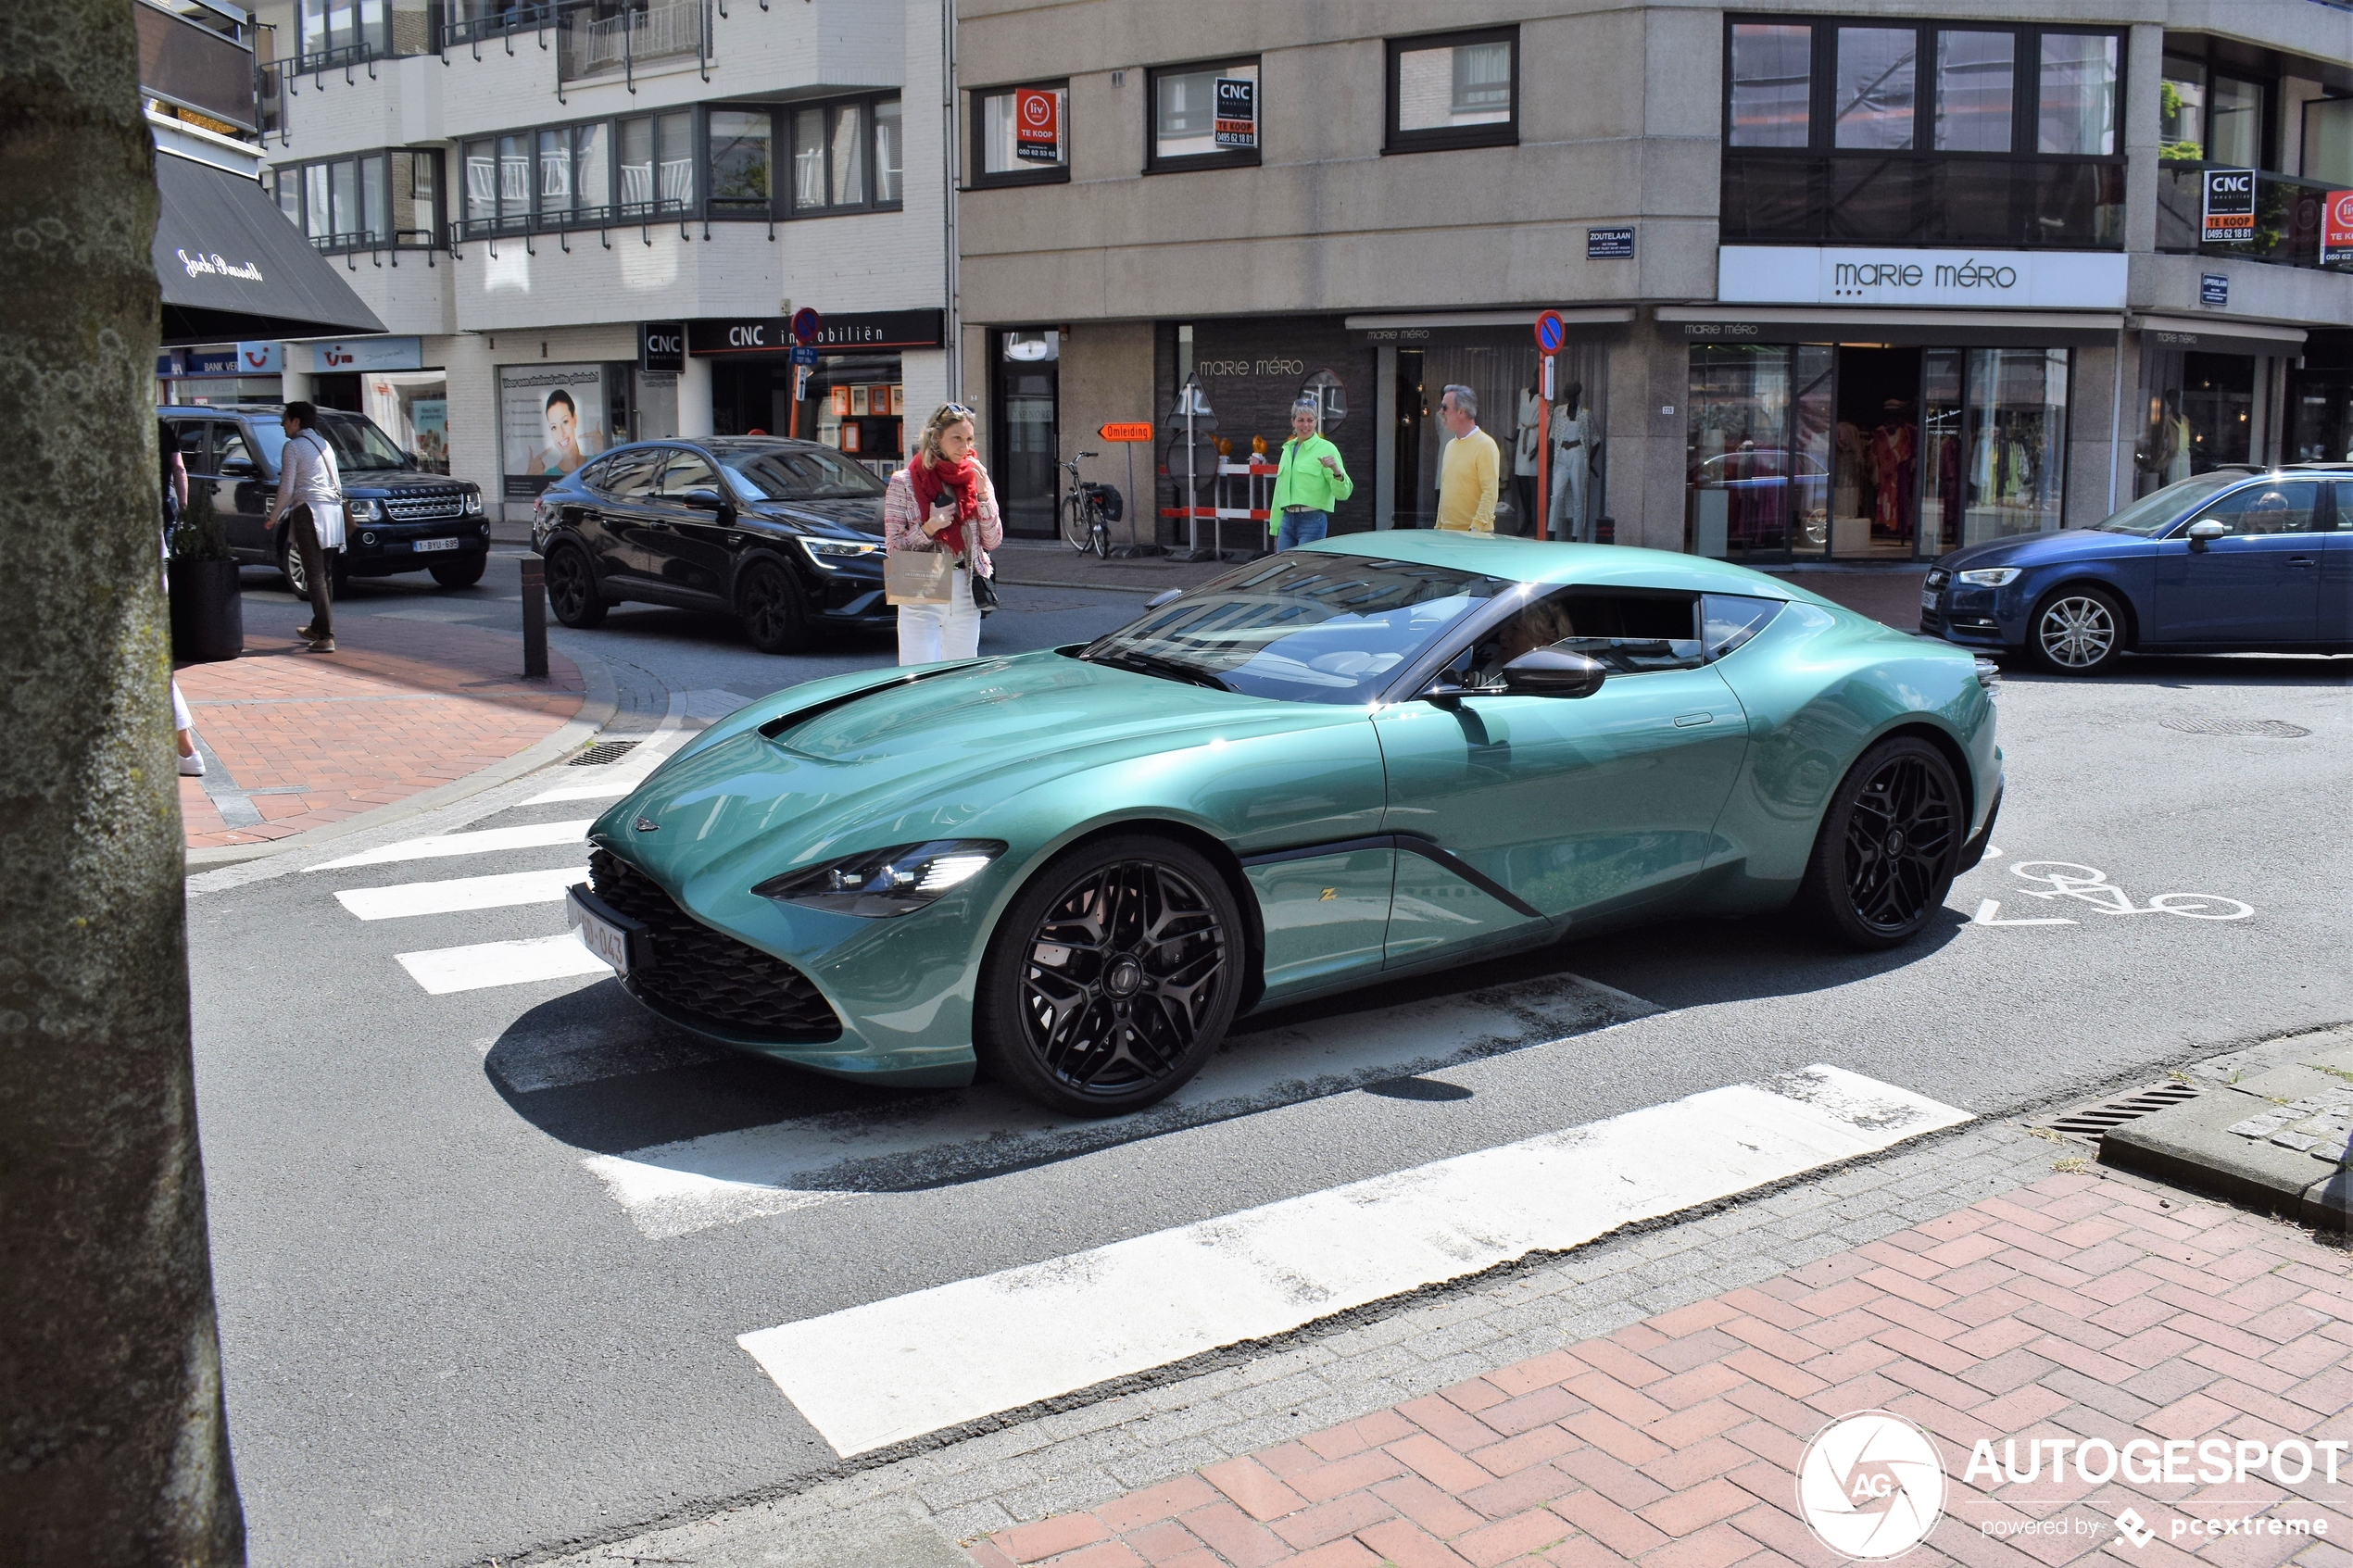 Extremely rare Aston Martin DBS GT Zagato shows up at Knokke-Heist.